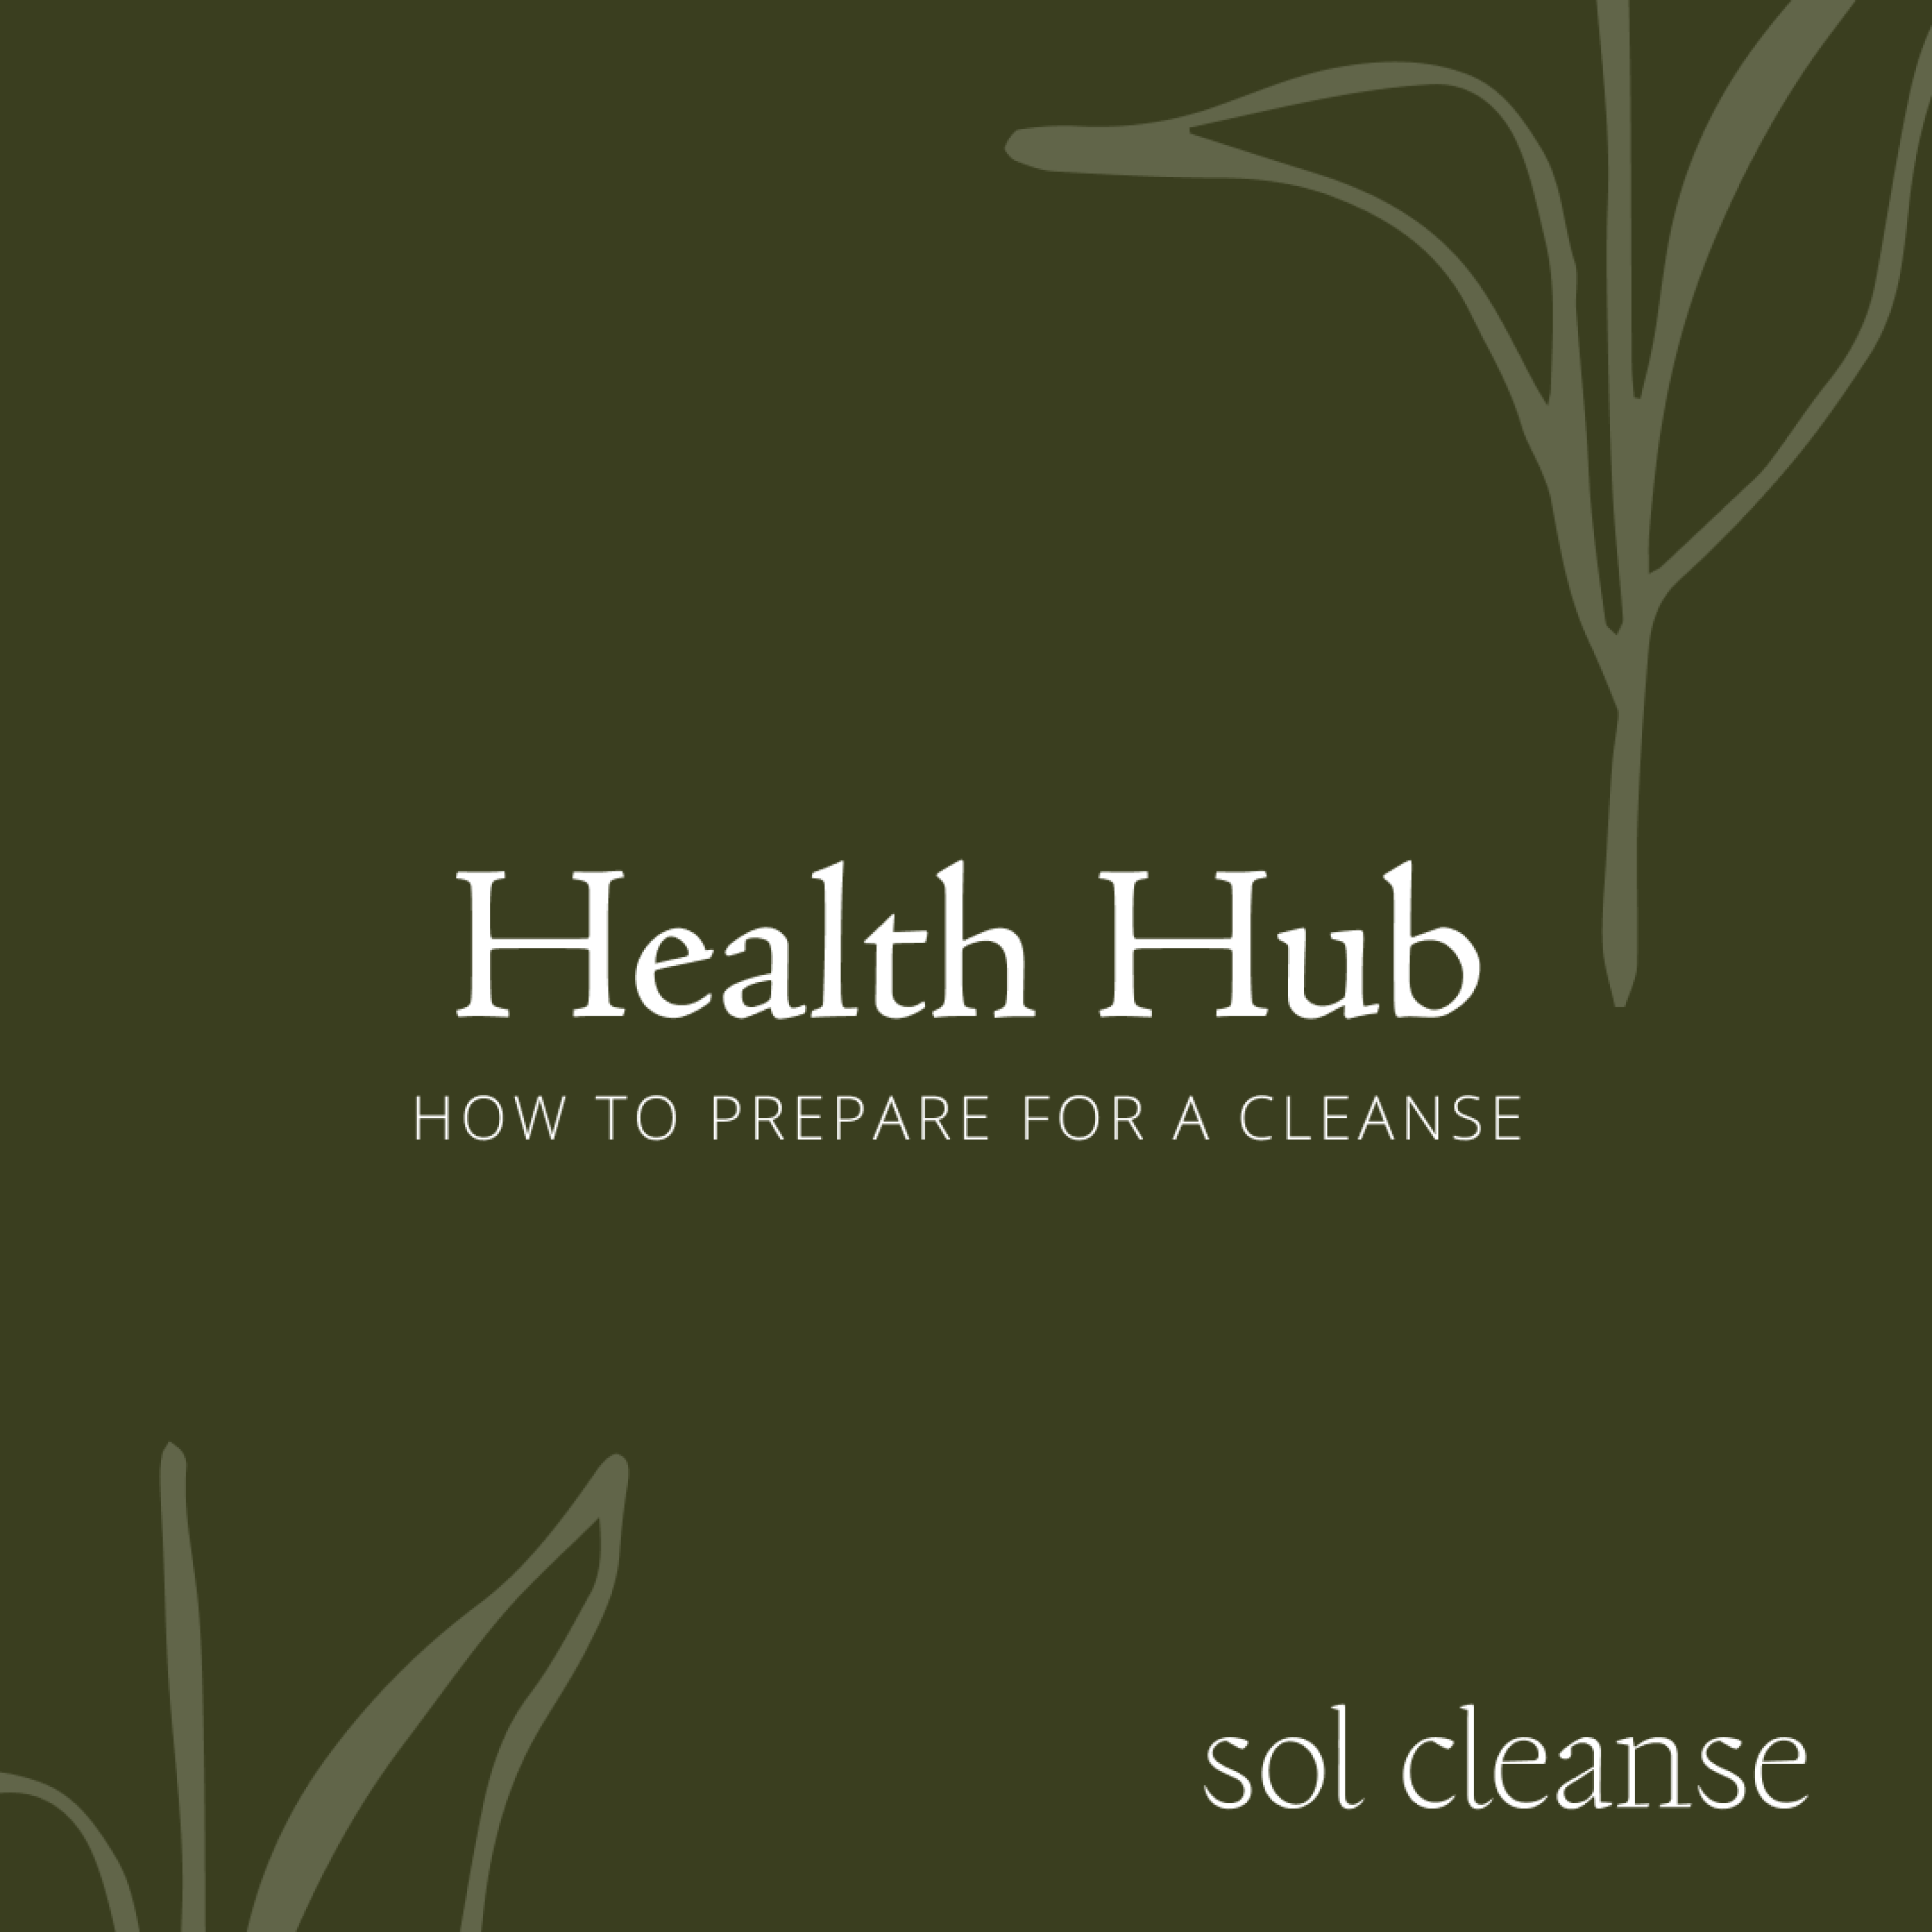 Health Hub: How to prepare for a cleanse